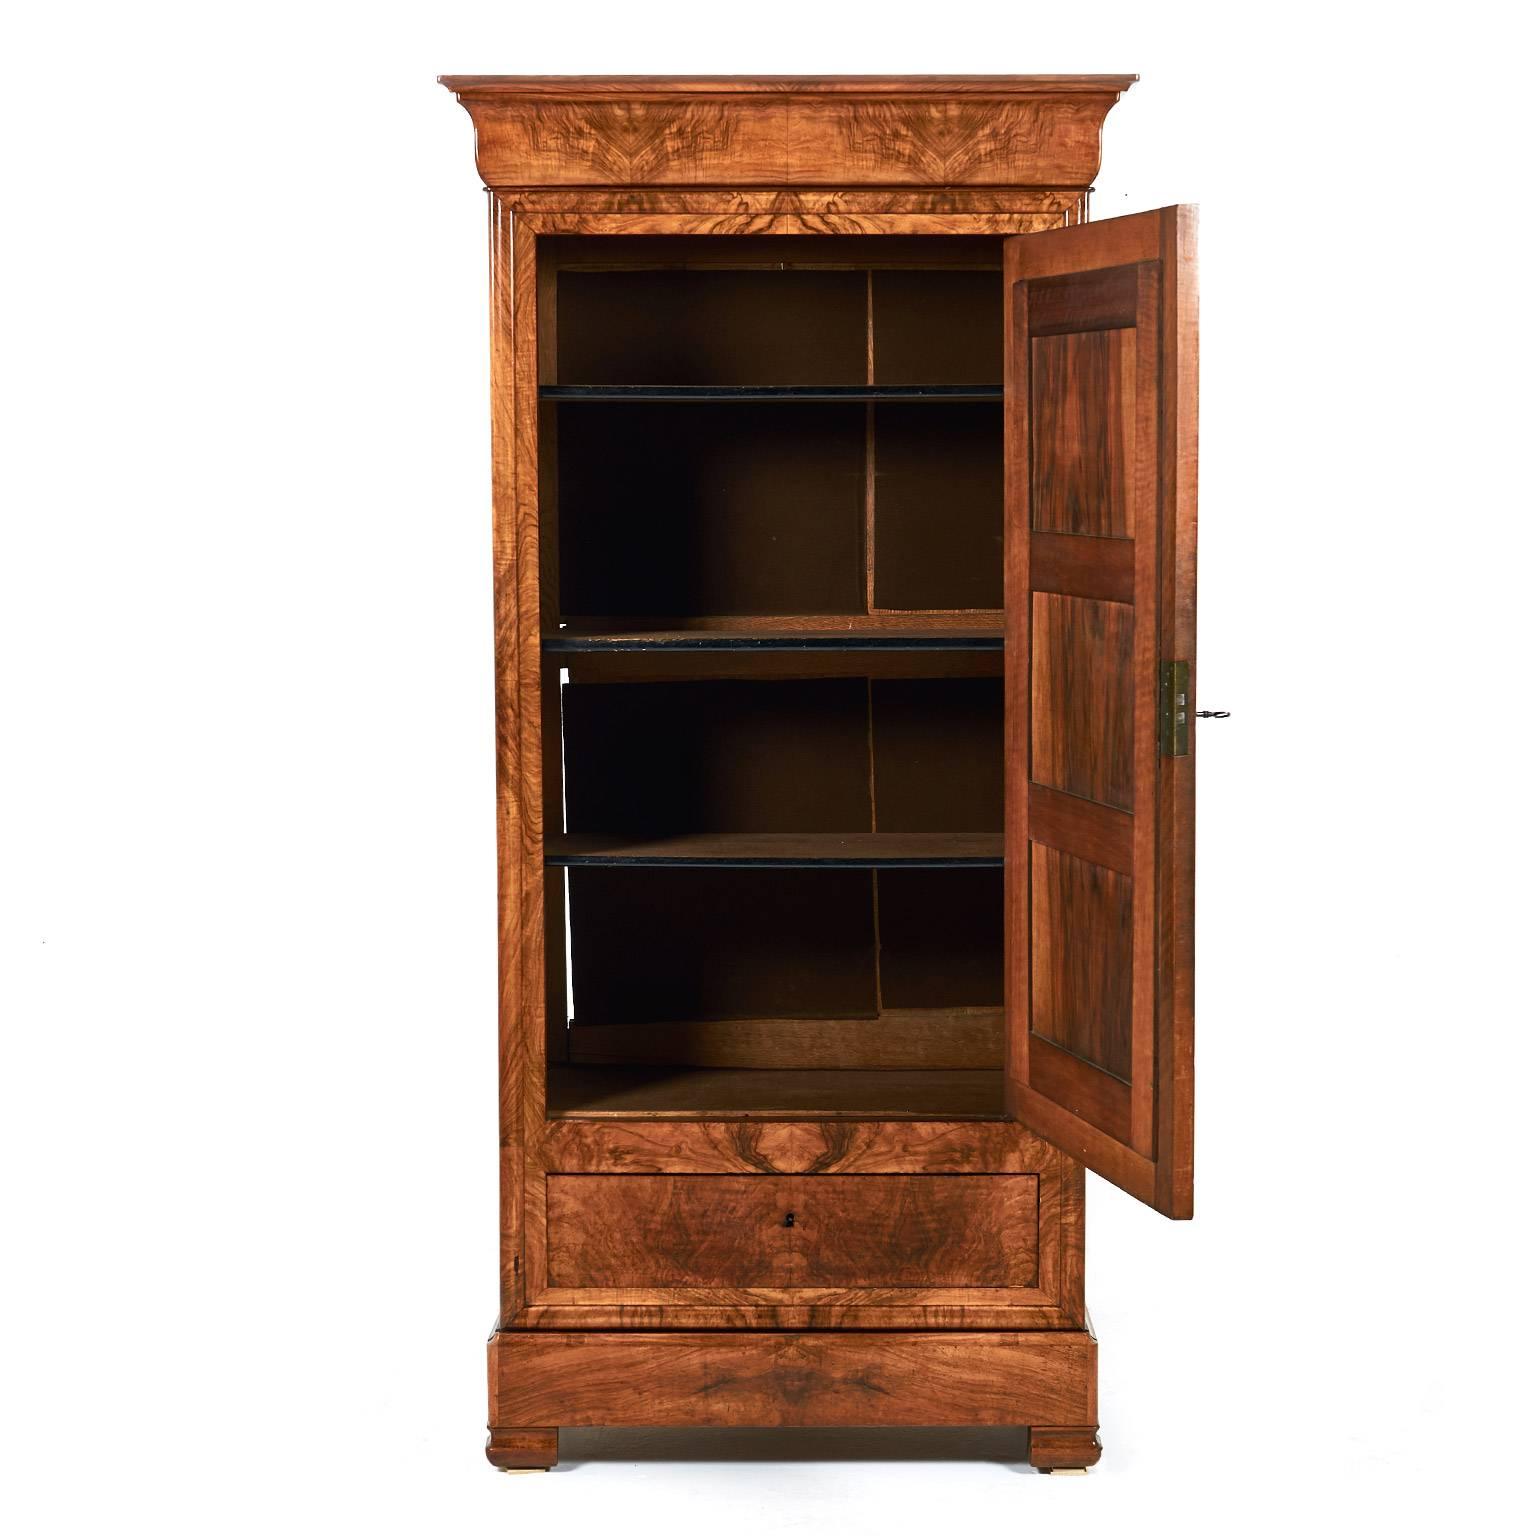 Antique French burl walnut Louis Philippe mirrored door armoire, with adjustable interior shelves and two drawers below one obvious and one hidden in the base. An unusually-compact version of a Classic mid-19th century French design, circa 1870. Its